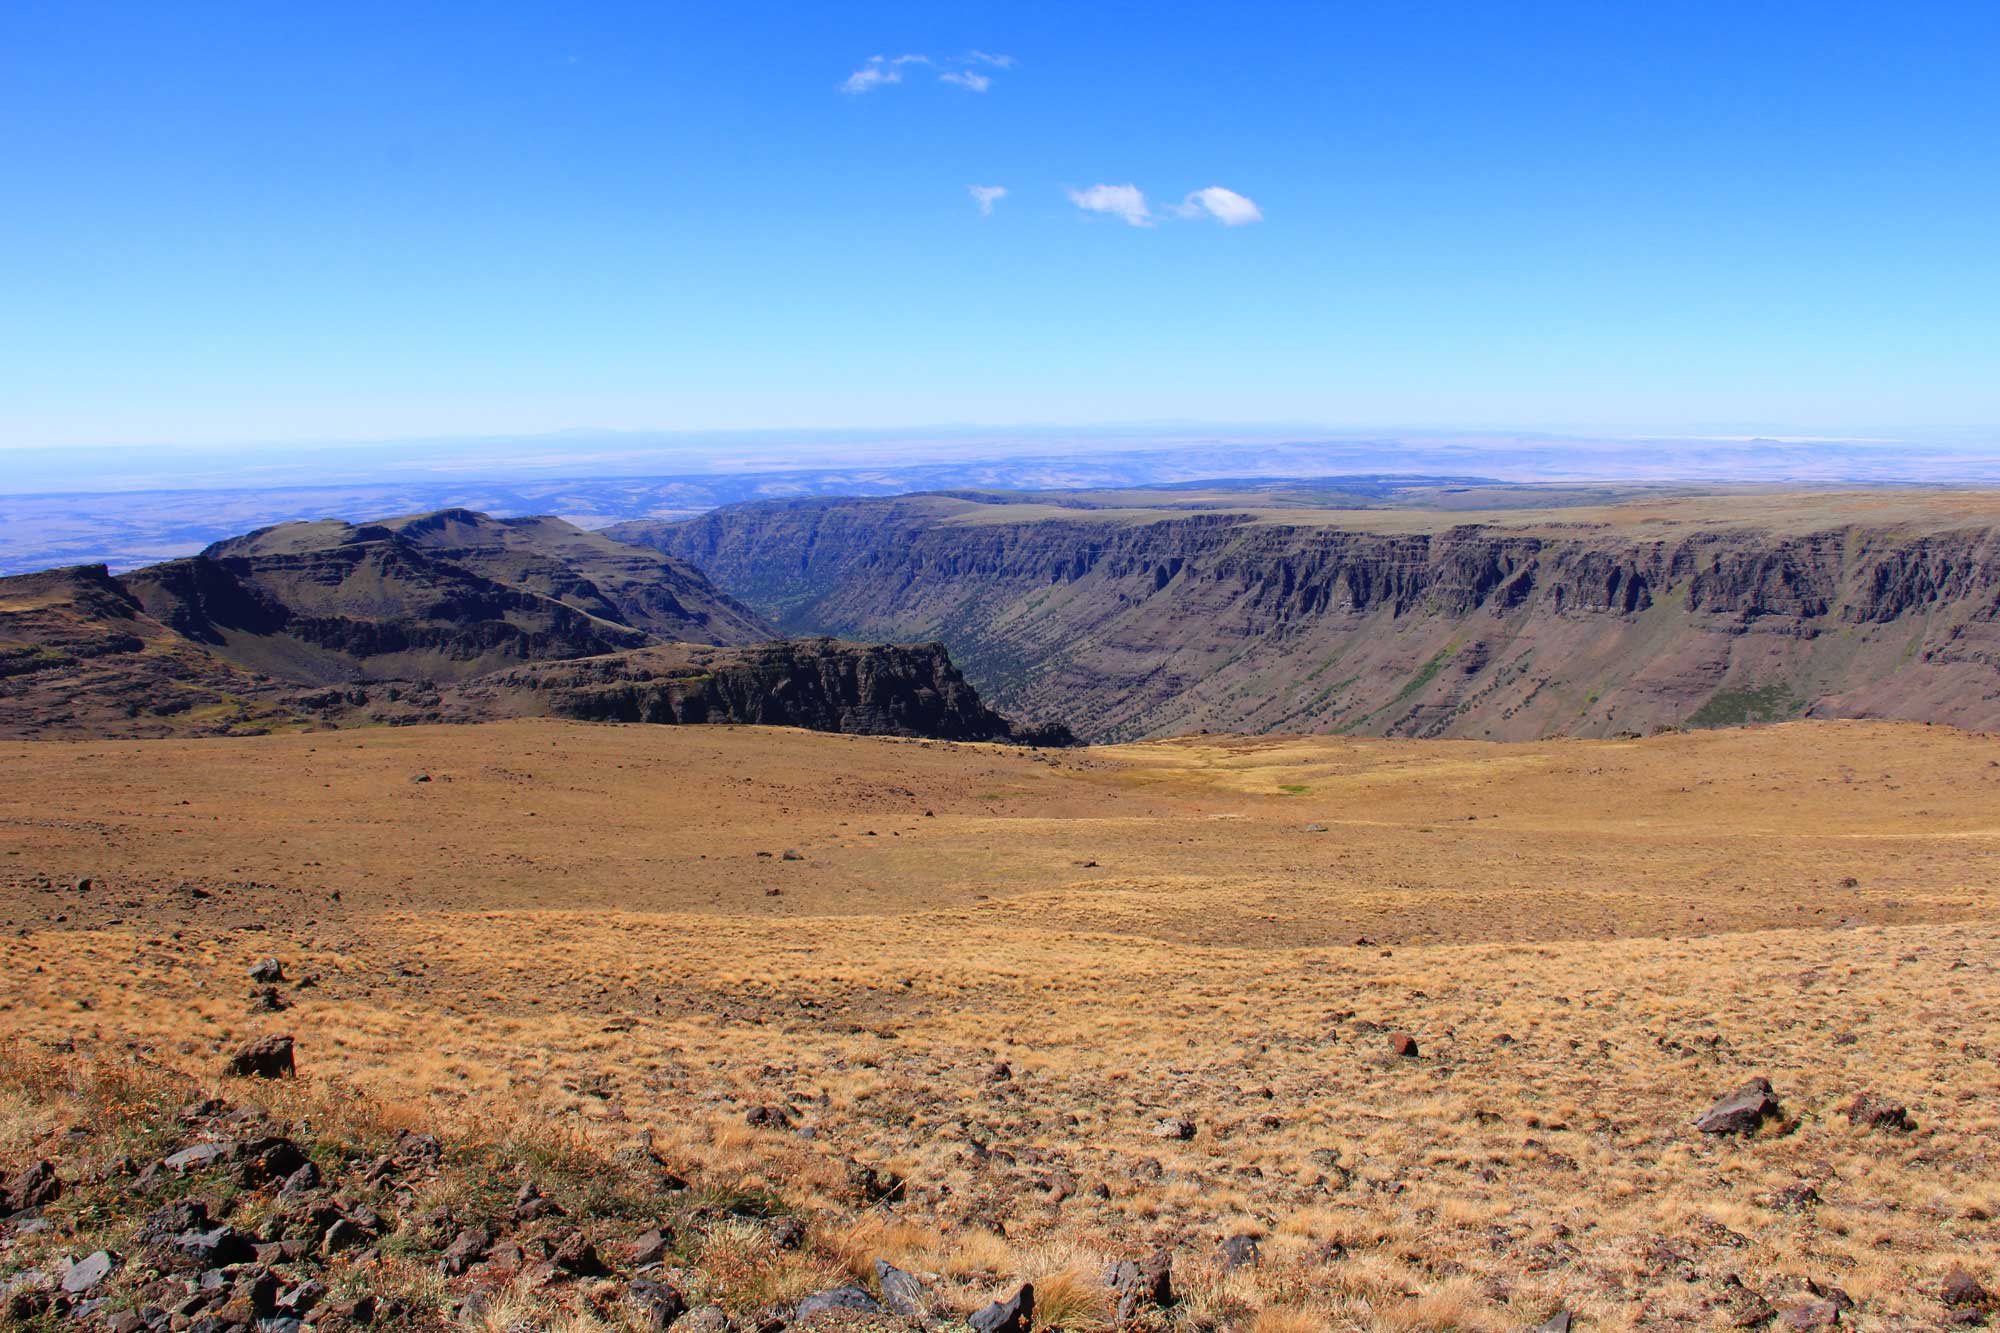 Photograph of Steens Wilderness in Oregon. The photo shows a dry landscape covered with short, yellow grasses. In the distance, a canyon with sloping walls and a steep caprock cuts through the landscape.